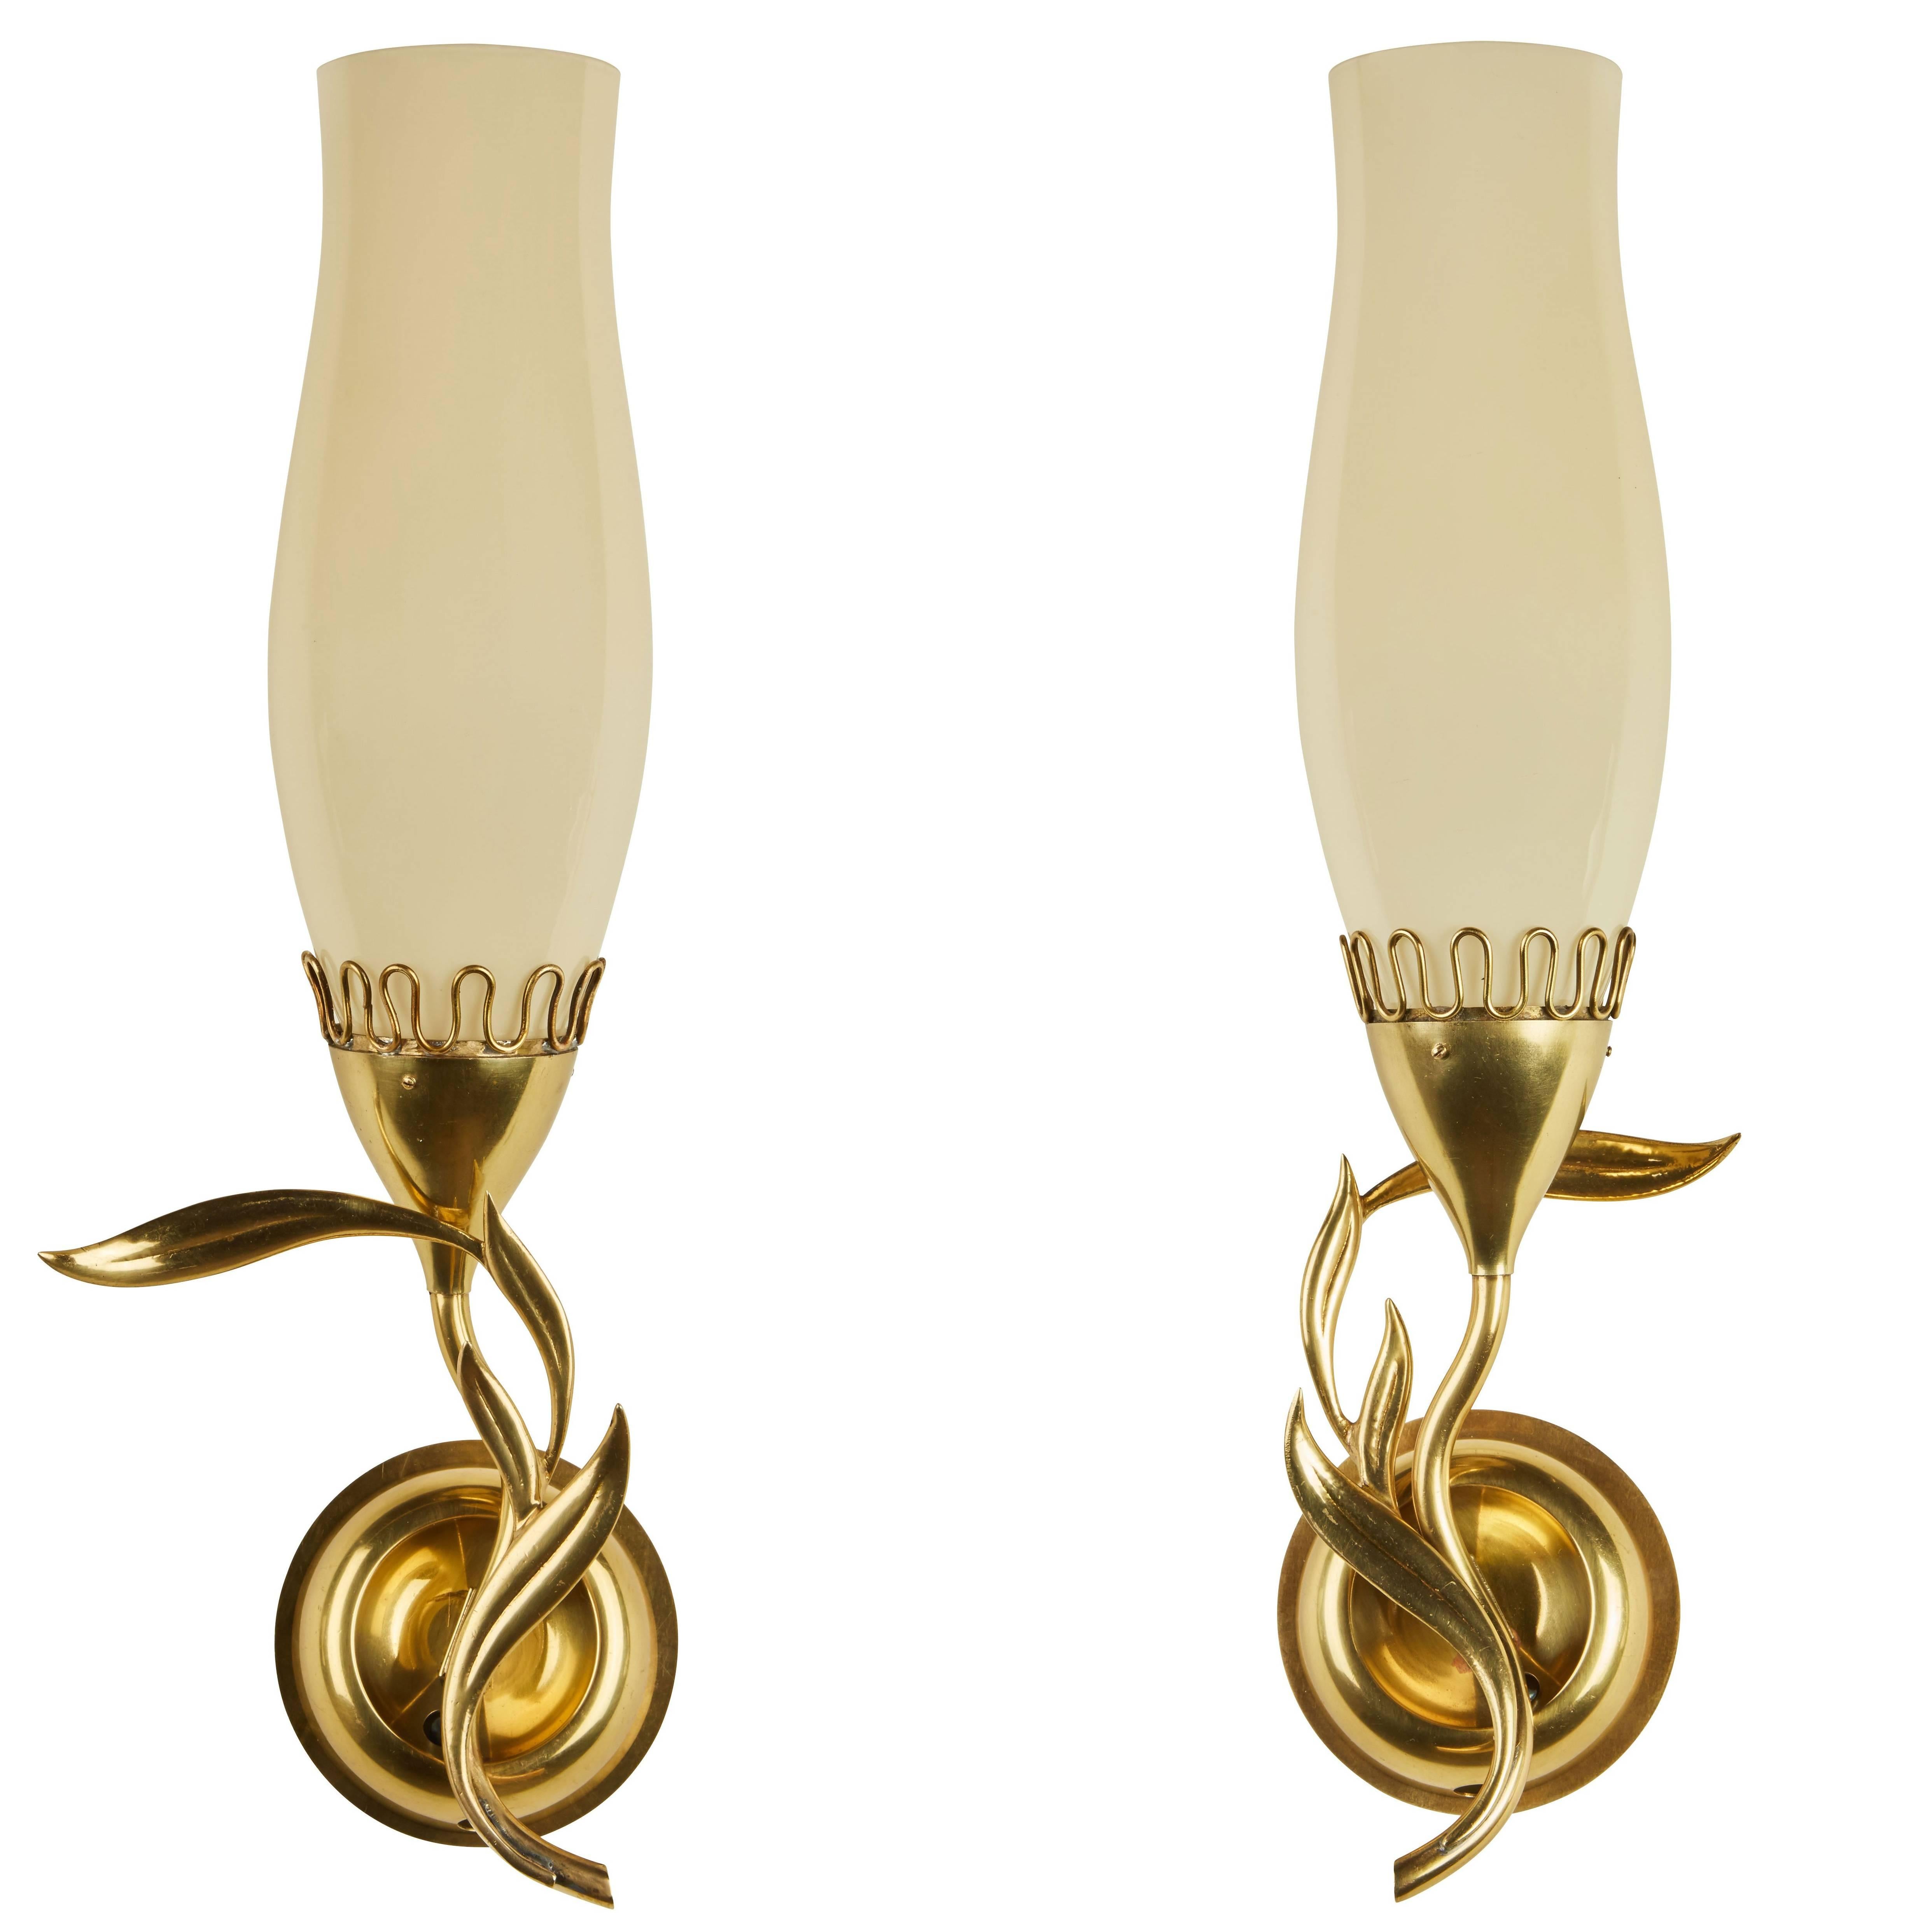 Unique Pair of Sconces by Paavo Tynell for Taito Oy